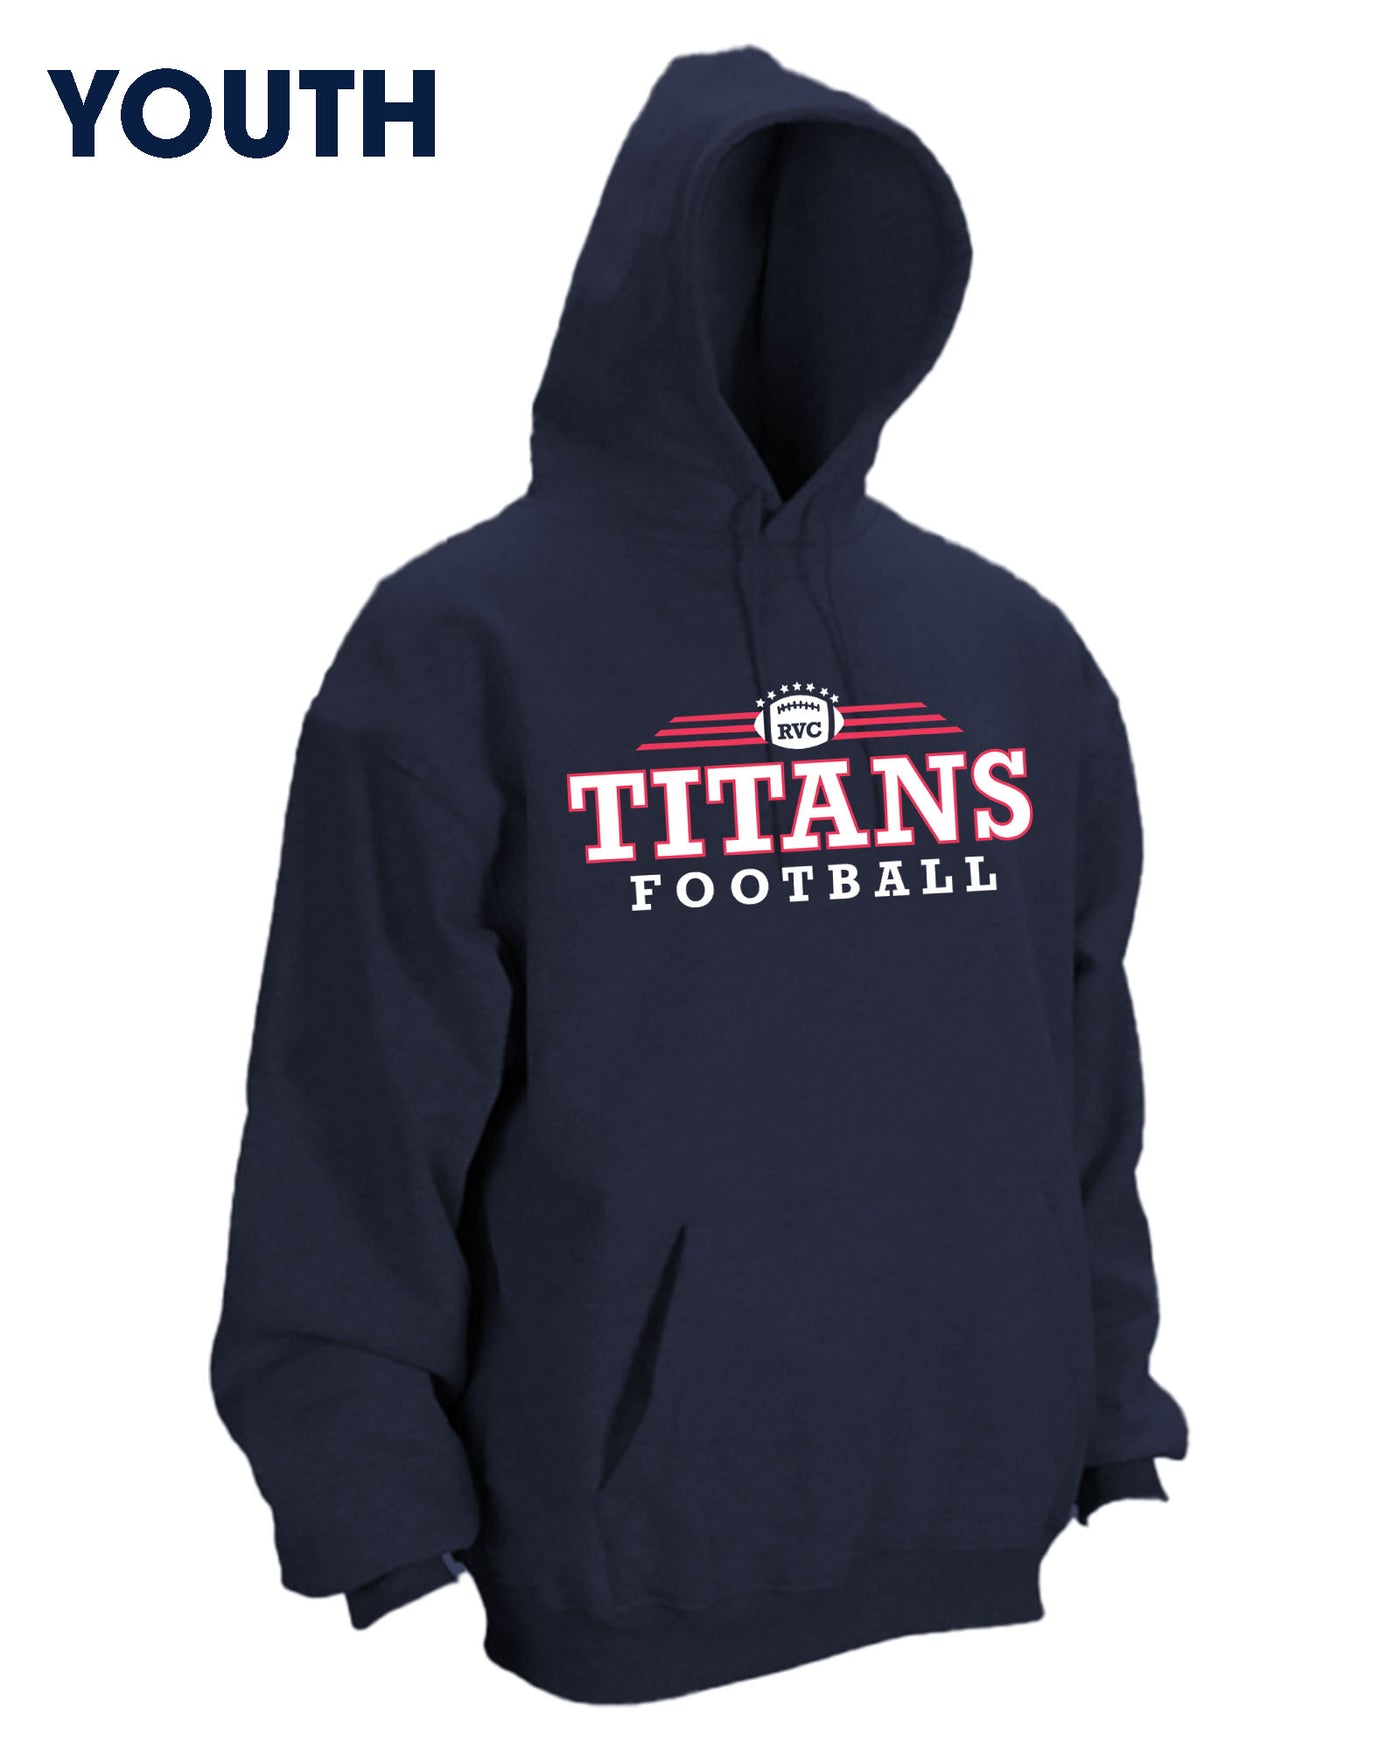 YOUTH Titans Classic Hoodie